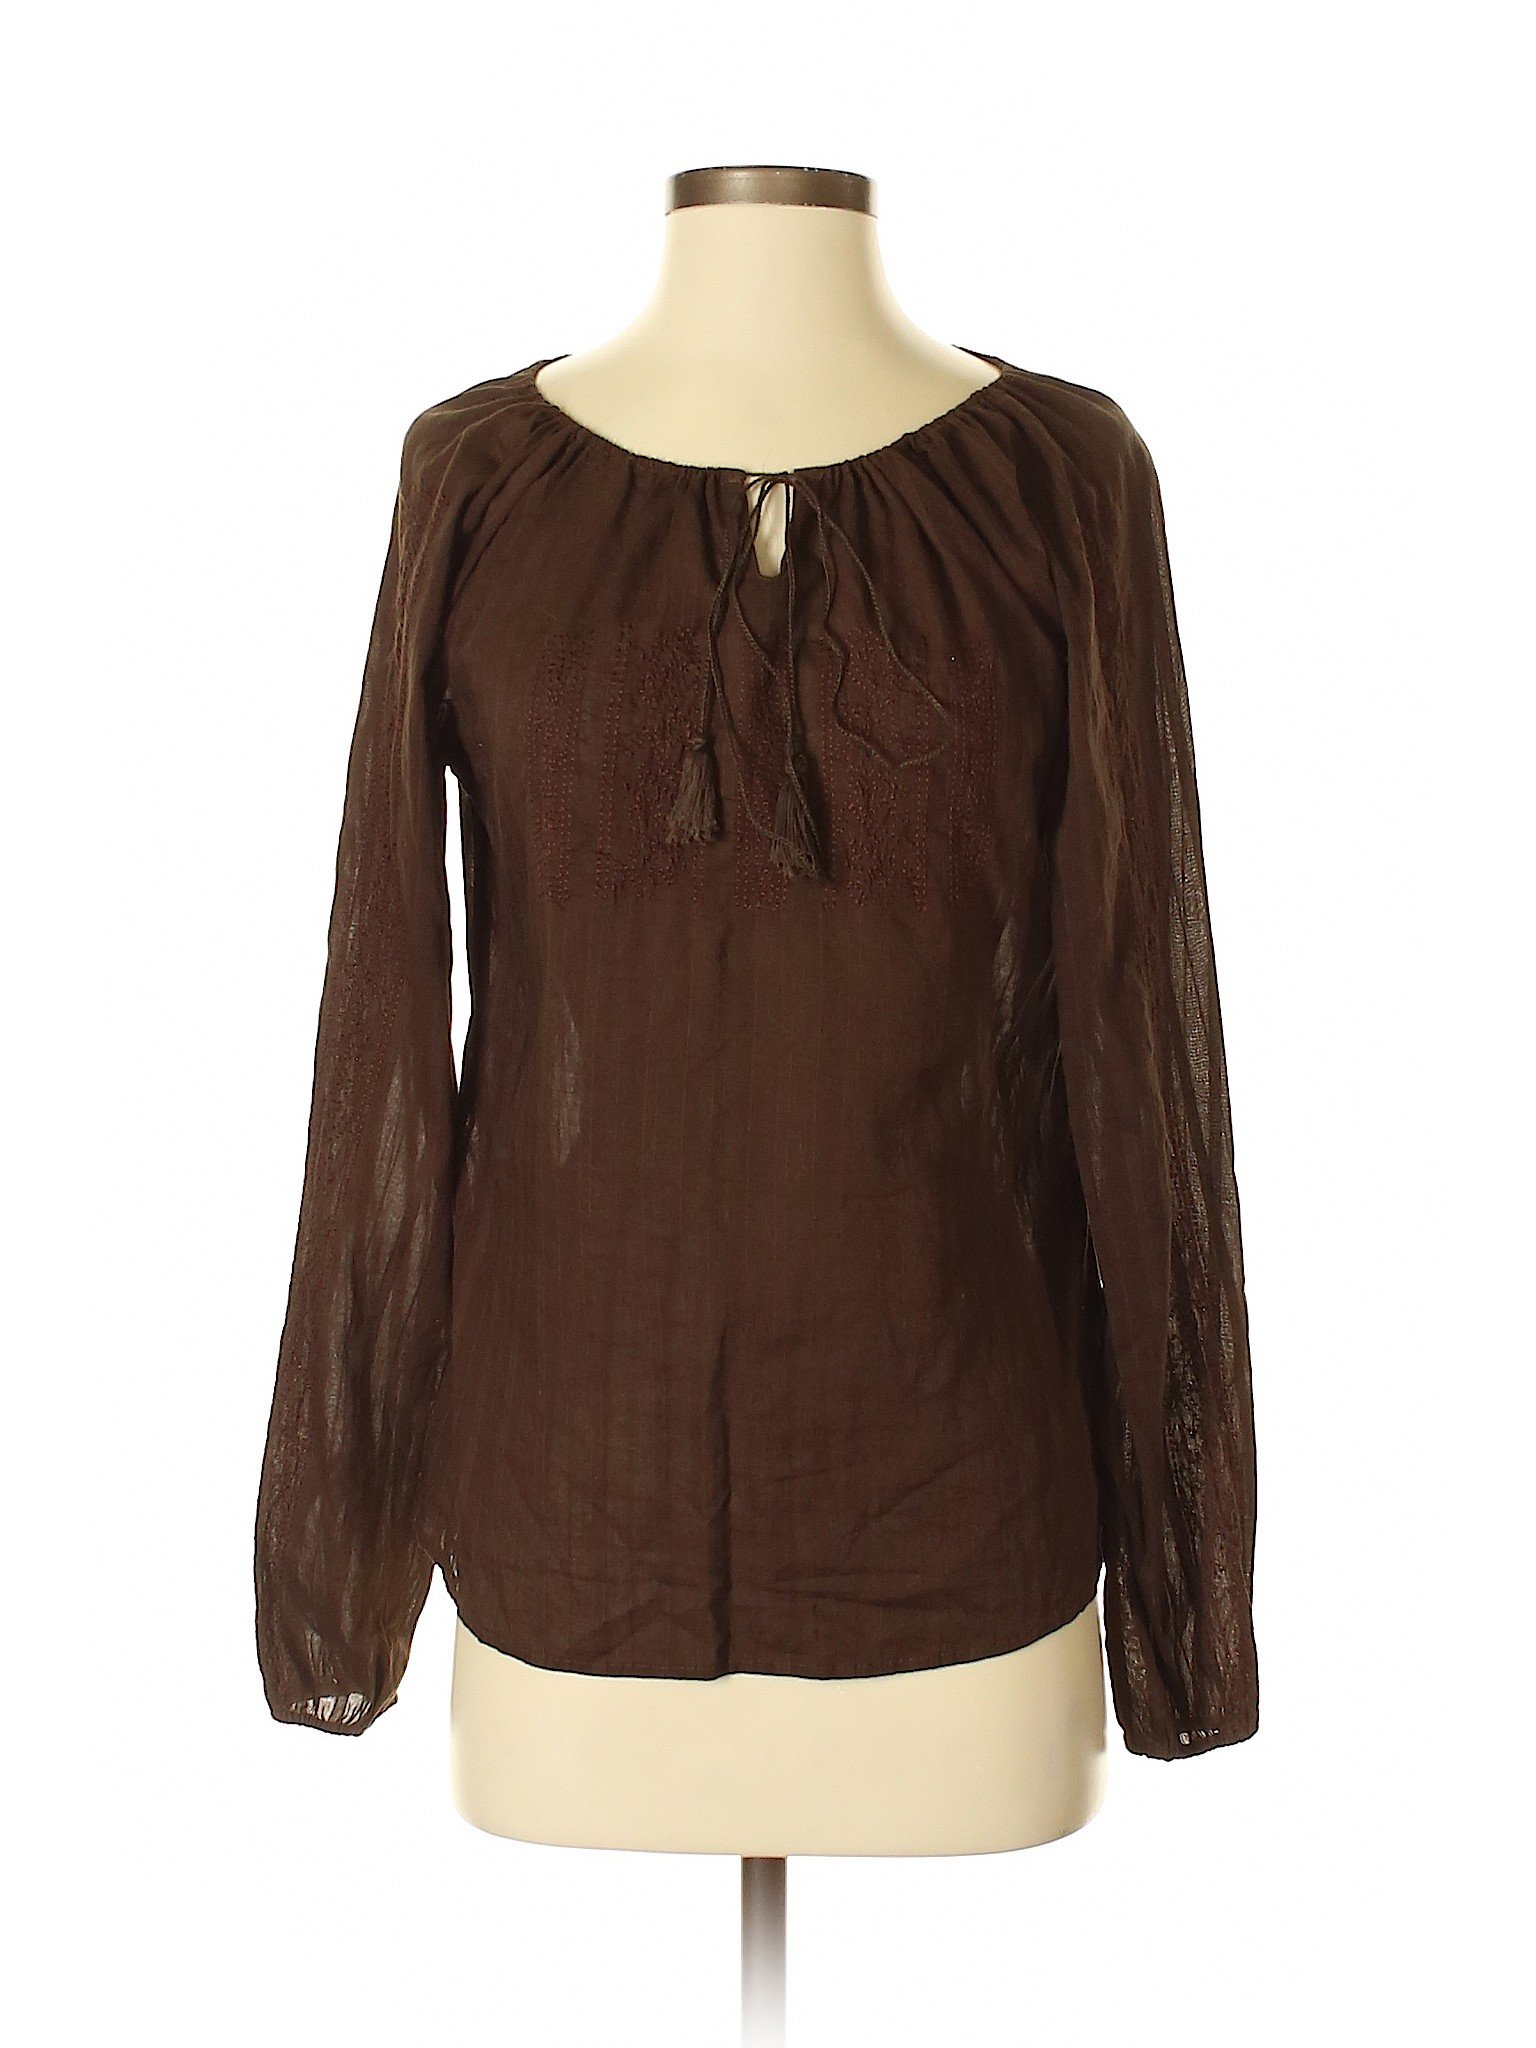 Gap 100% Cotton Solid Brown Long Sleeve Blouse Size S - 95% off | thredUP